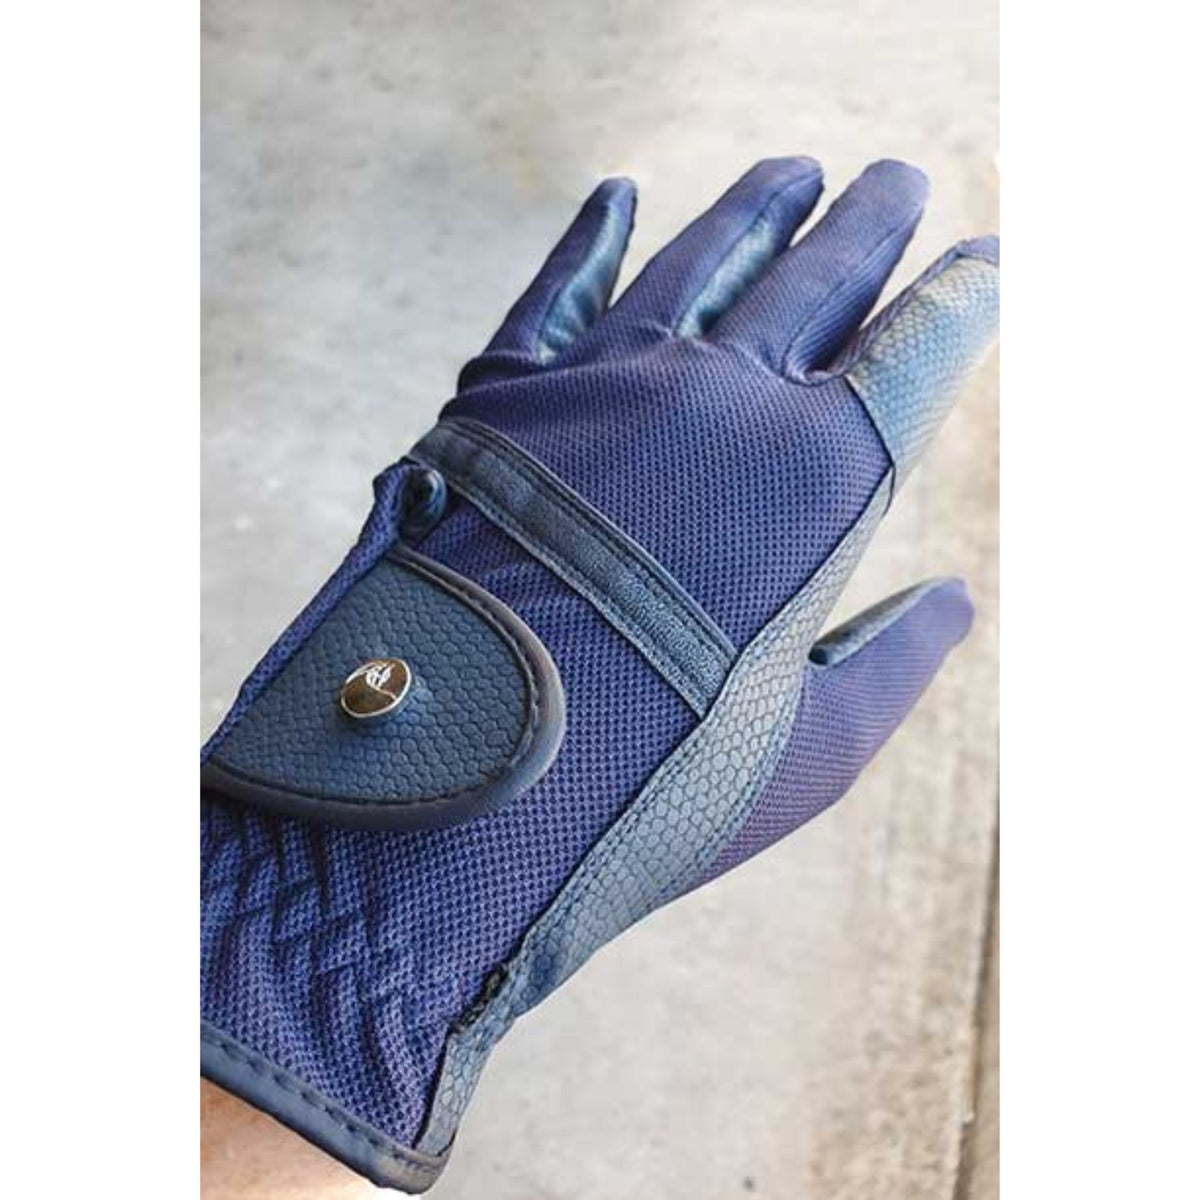 Navy mesh riding gloves on hand, with subtly patterned leather detailing.